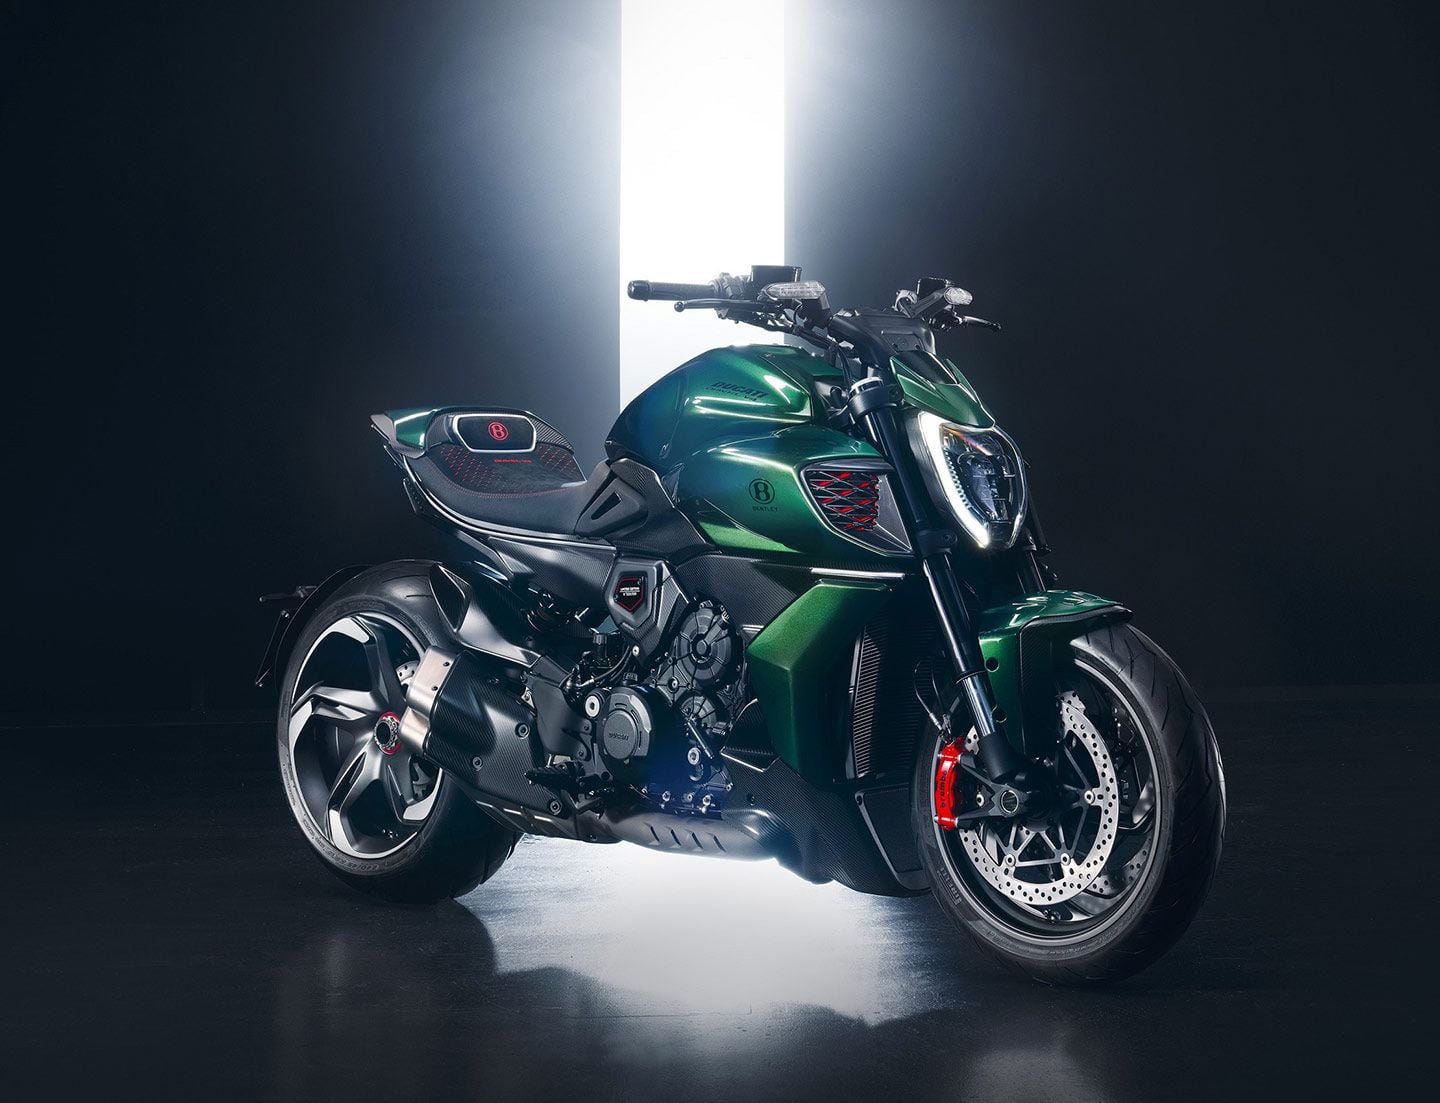 Meet the Ducati Diavel for Bentley, an exclusive Diavel V4 that integrates elements of Bentley’s limited-edition Batur hypercar.